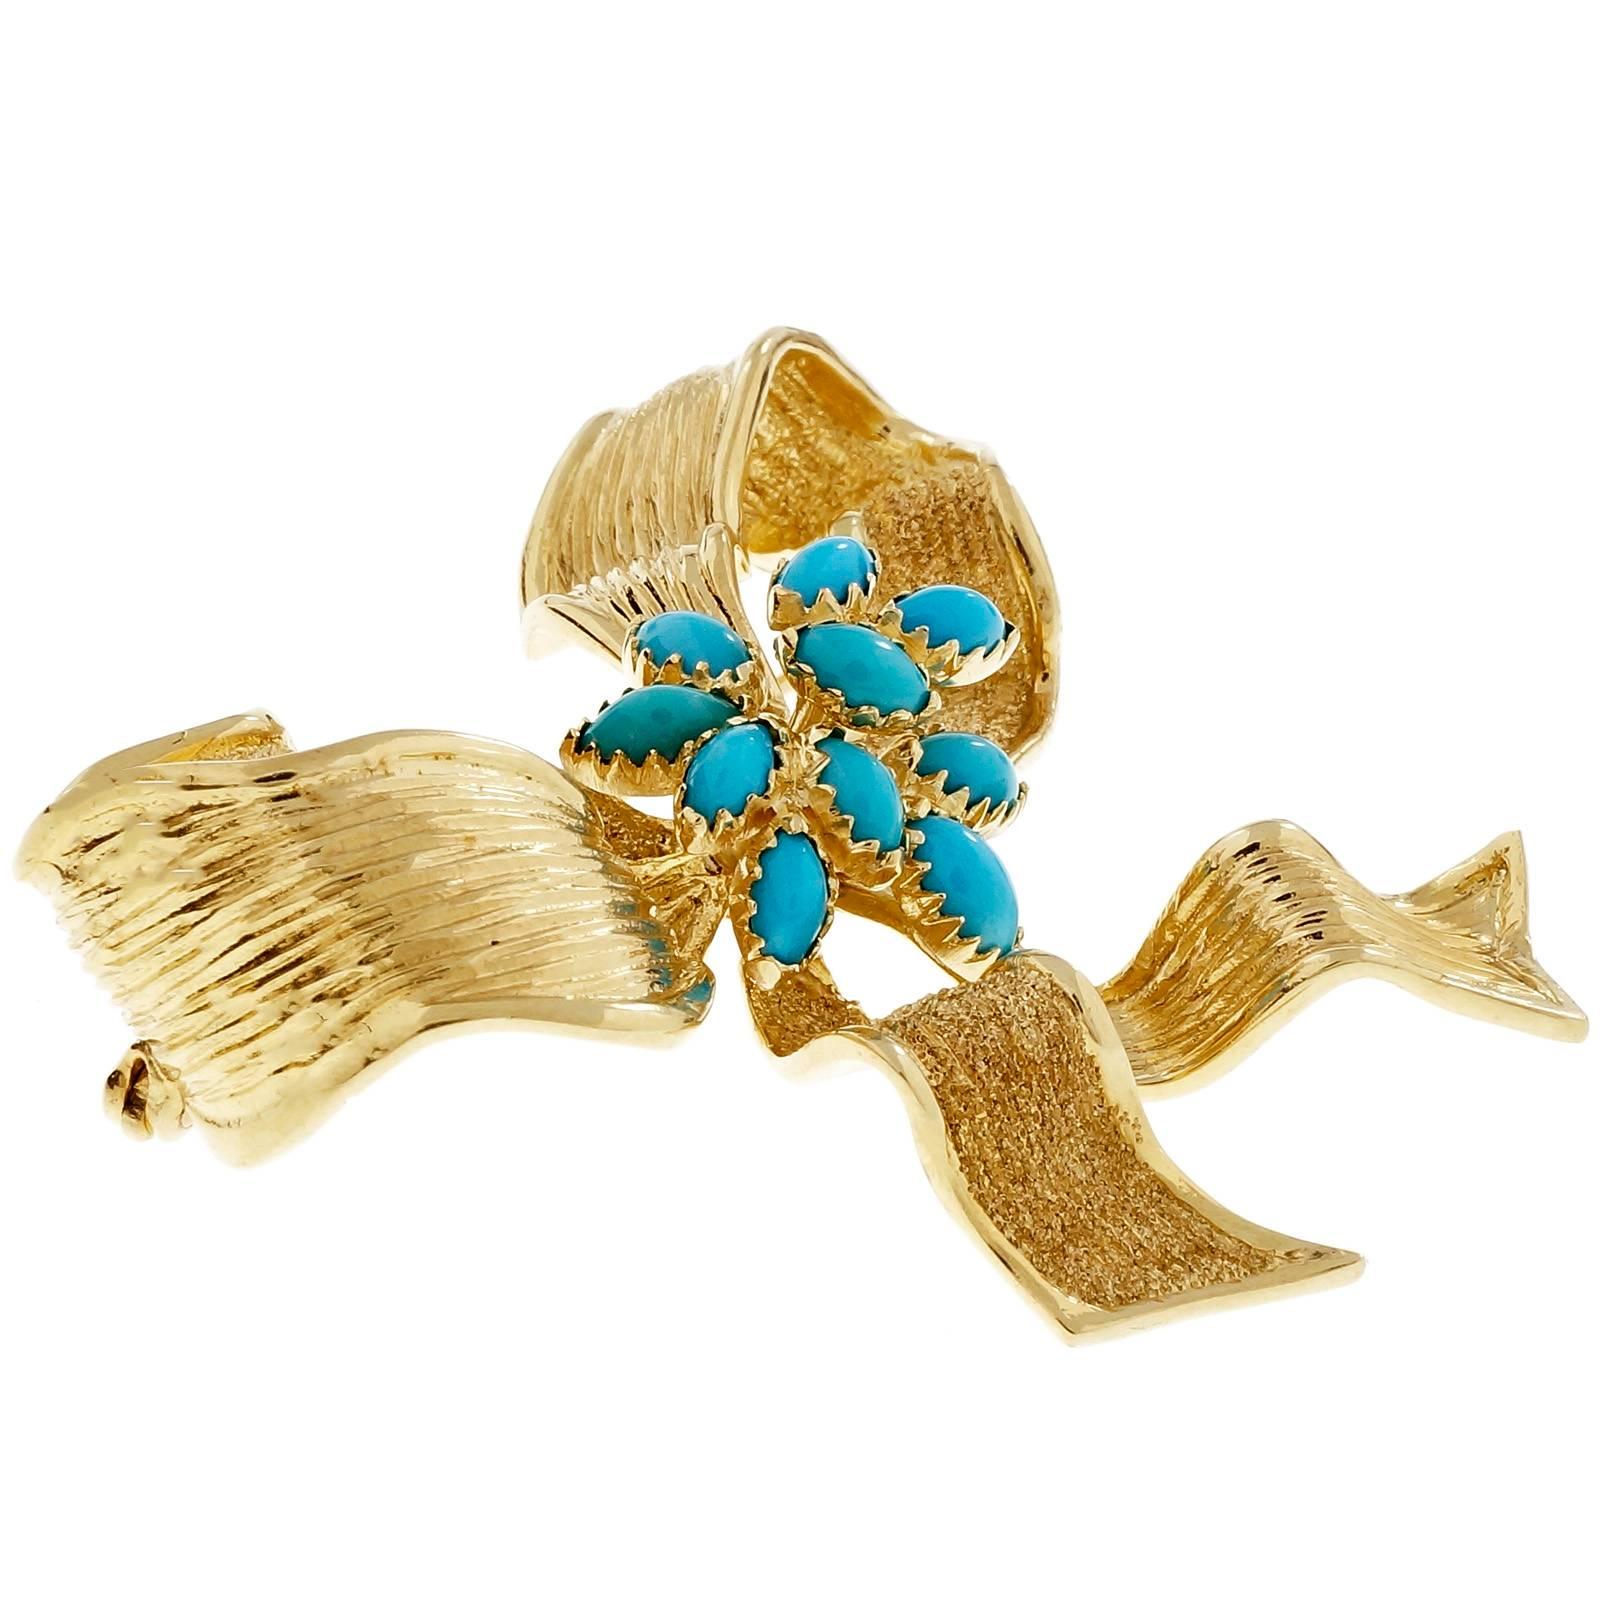 GIA certified Persian turquoise textured yellow gold bow brooch. Crafted with 1950's precision and artistry, this brooch features 9 cabochon marquise shaped turquoise, set in a 14k yellow gold. The textured details add a touch of sophistication and